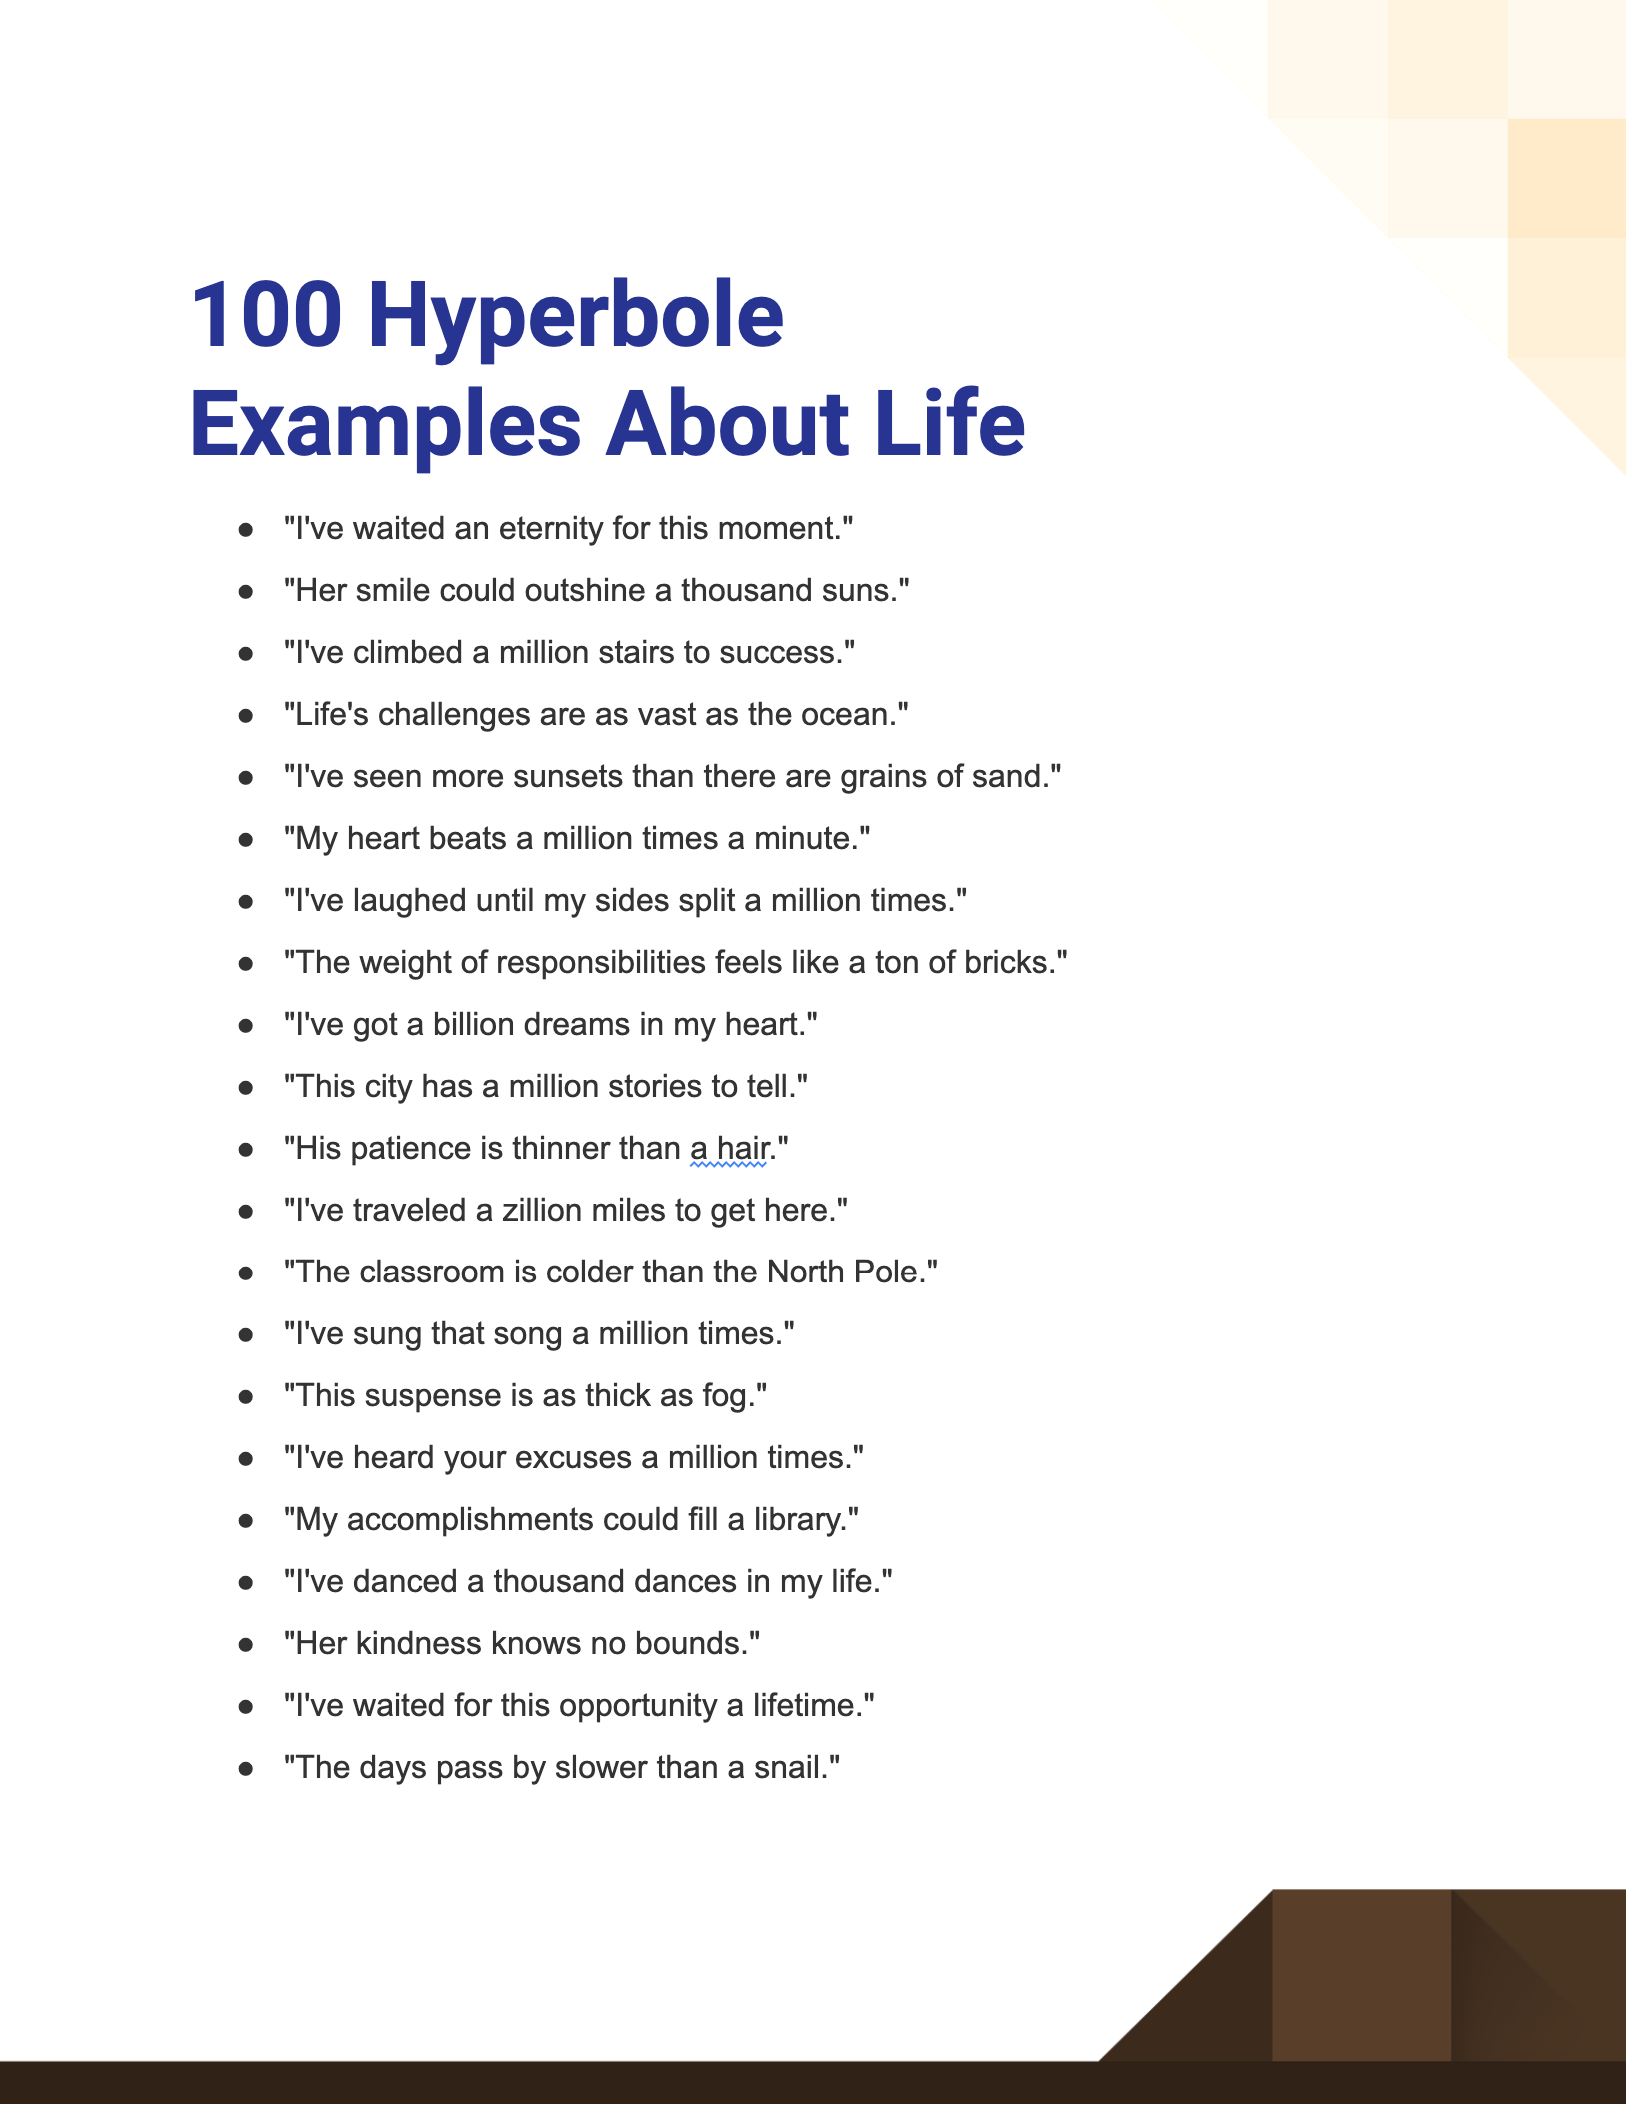 Hyperbole Examples About Life